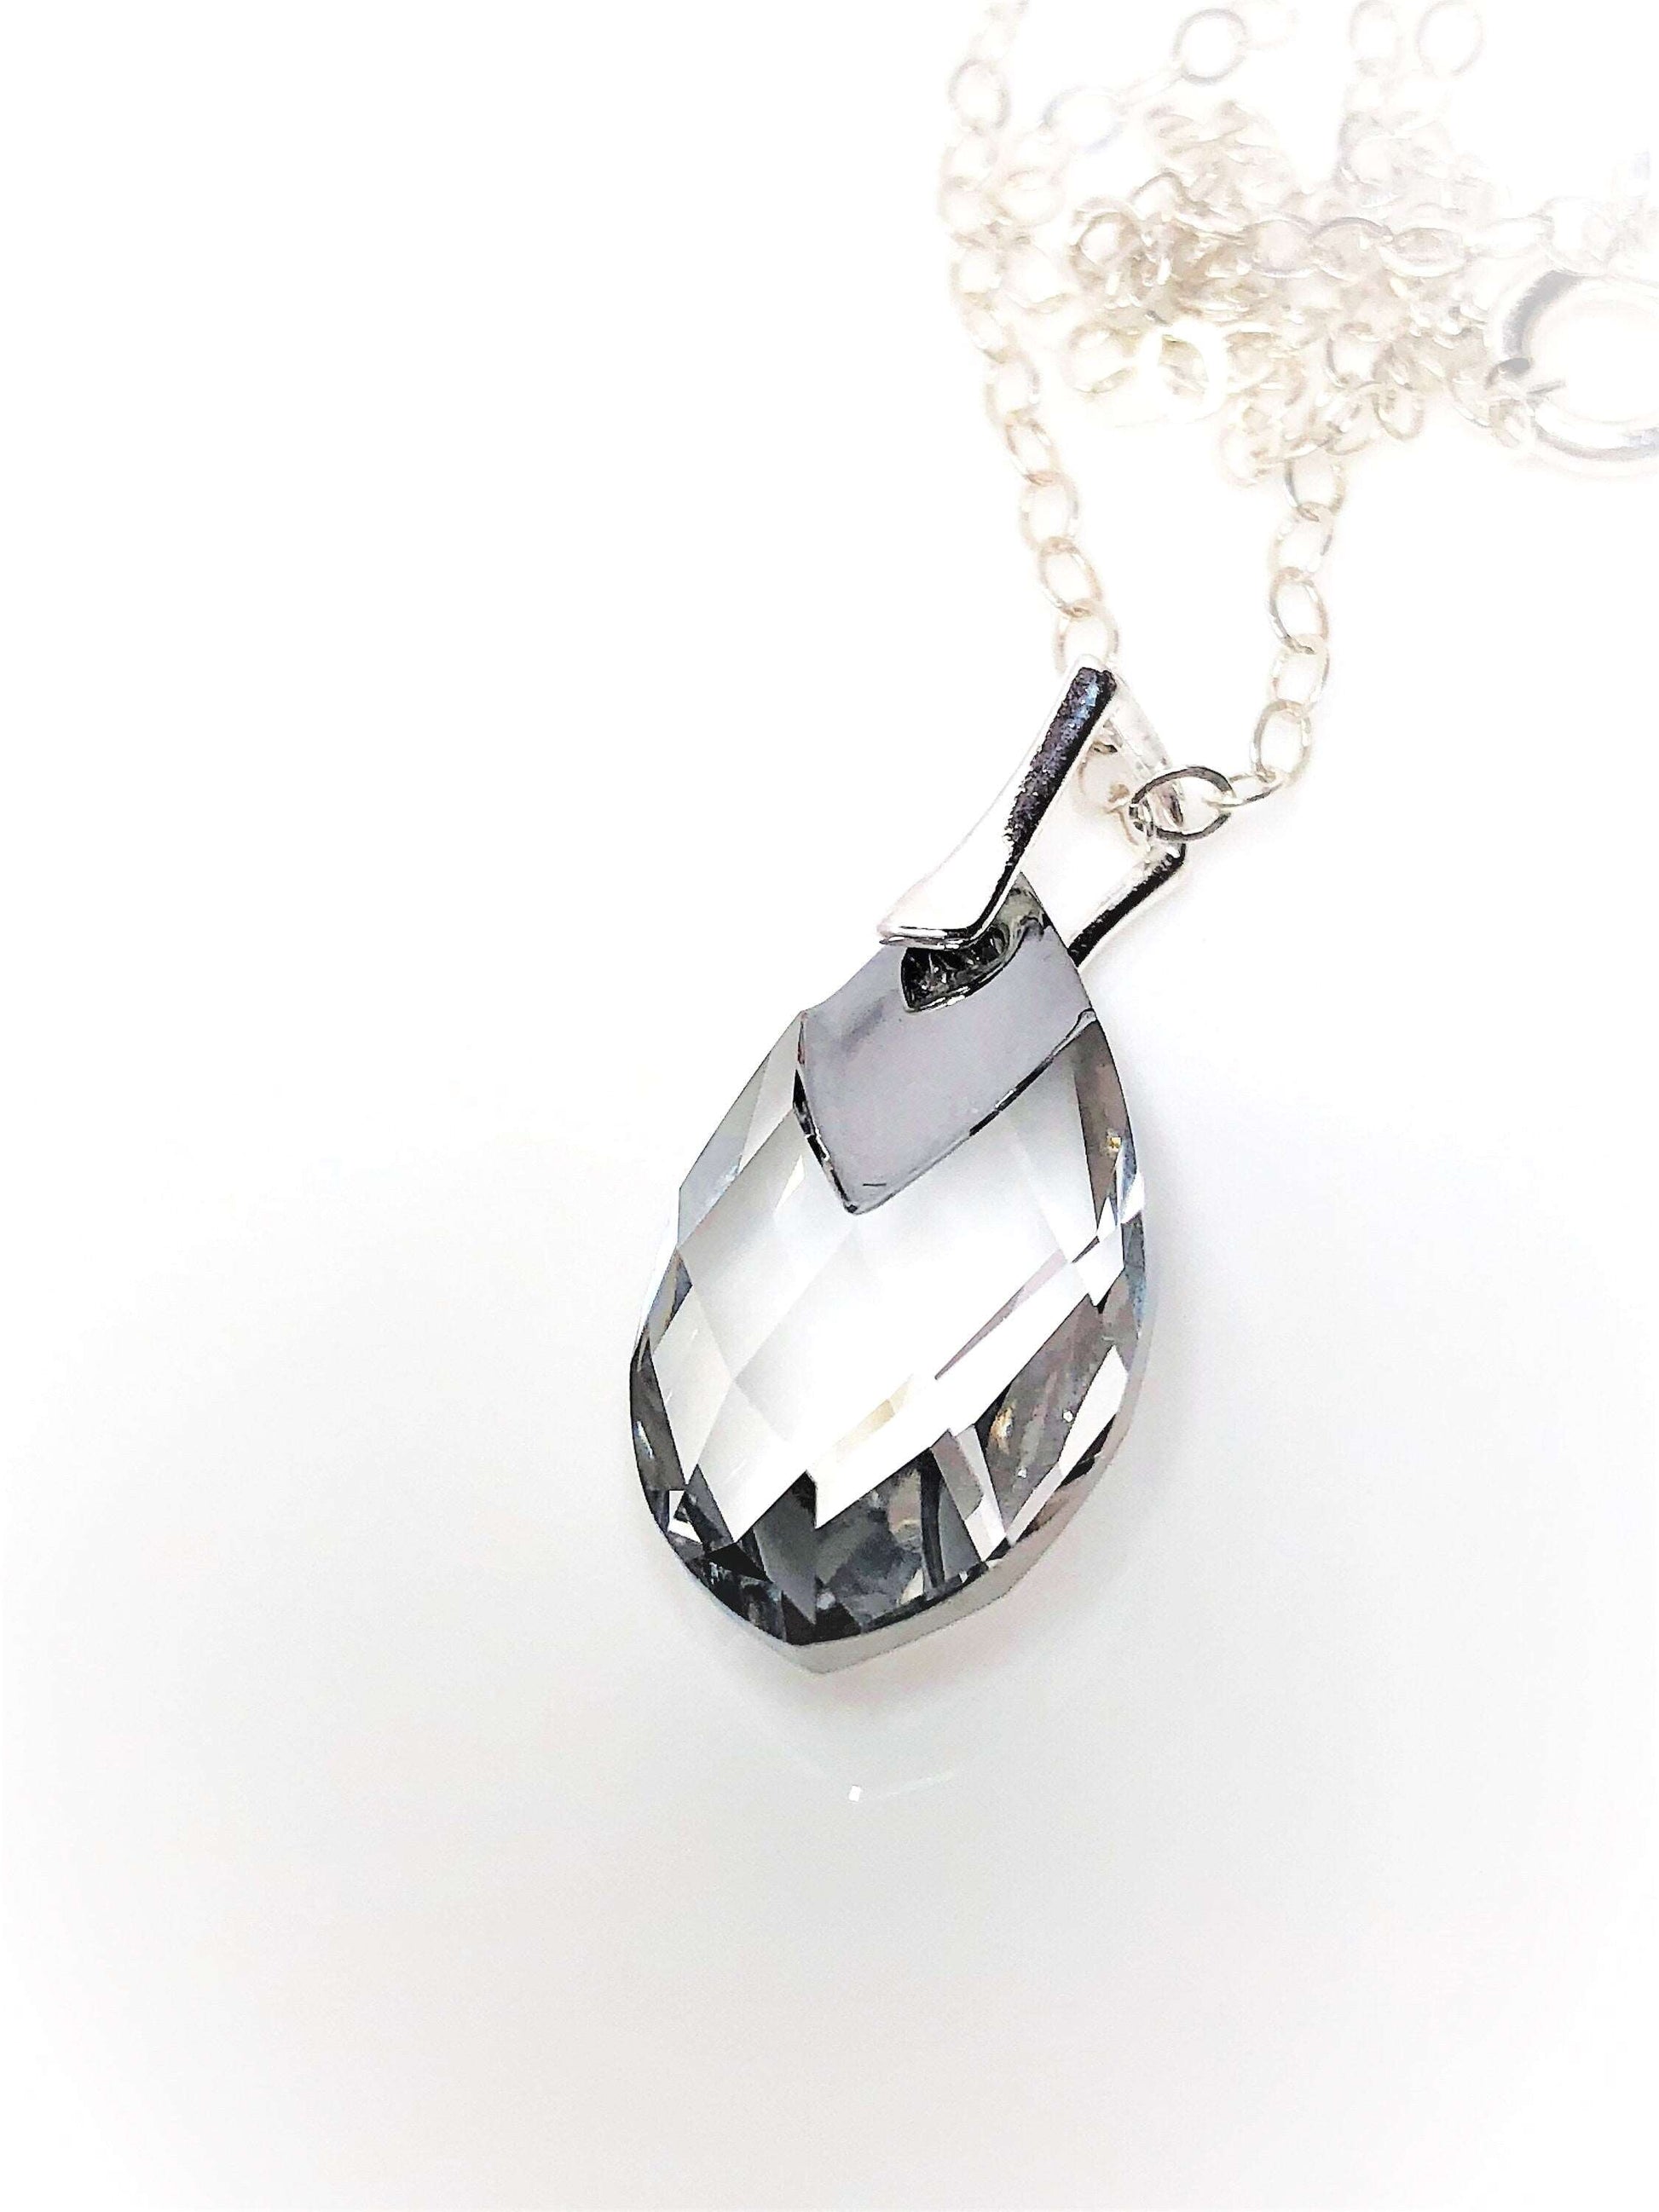 Clear Austrian Crystal Pendant, Light Chrome Necklace, Silver Crystal Teardrop, Crystal Wedding Jewelry, Bridesmaid Gift, Necklaces for Women